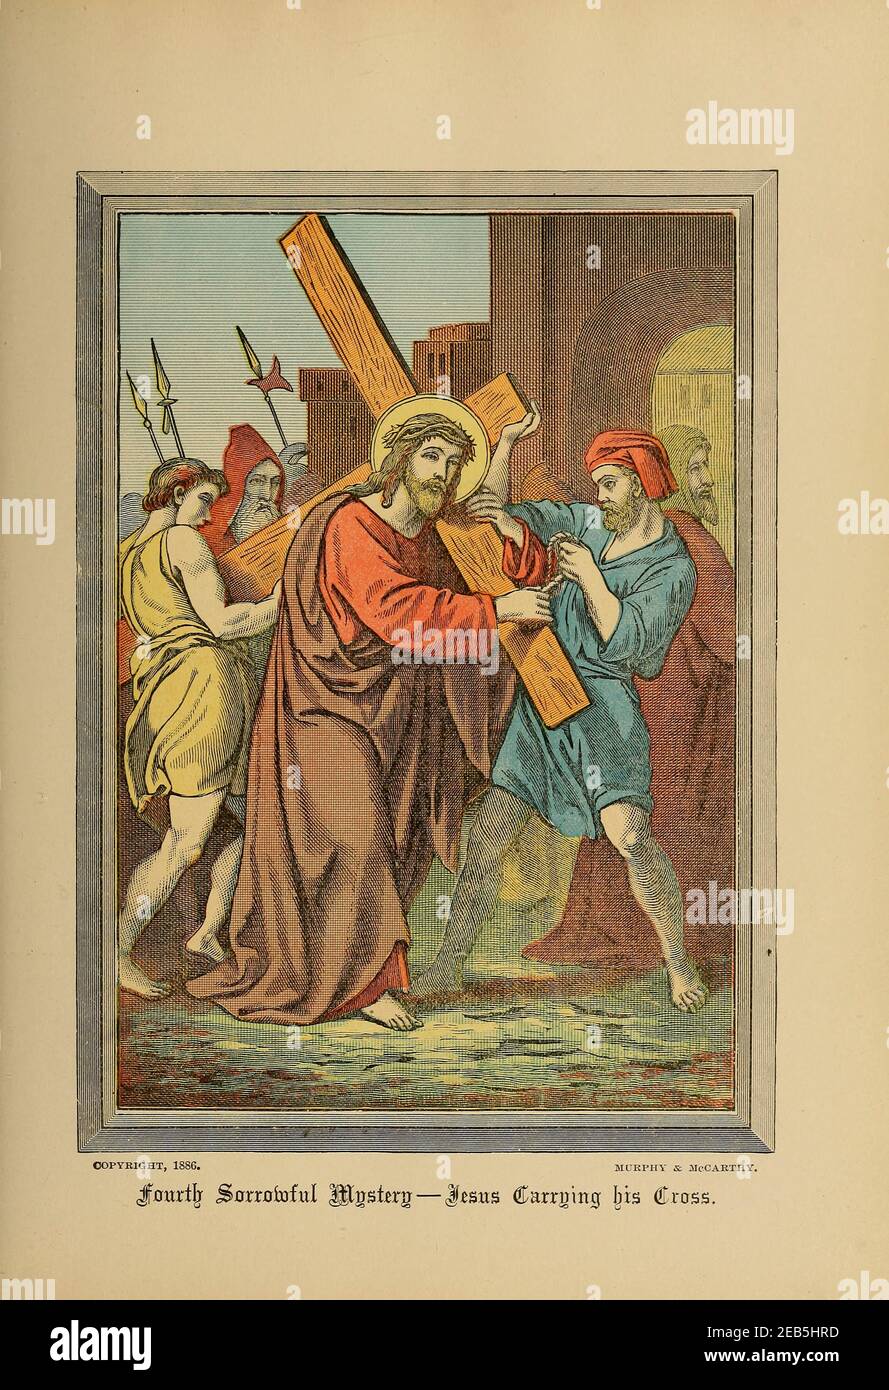 Forth Sorrowful Mystery Jesus Carrying His Cross From ' The pictorial Catholic library ' containing seven volumes in one: History of the Blessed Virgin -- The dove of the tabernacle -- Catholic history -- Apparition of the Blessed Virgin -- A chronological index -- Pastoral letters of the Third Plenary. Council -- A chaplet of verses -- Catholic hymns  Published in New York by Murphy & McCarthy in 1887 Stock Photo